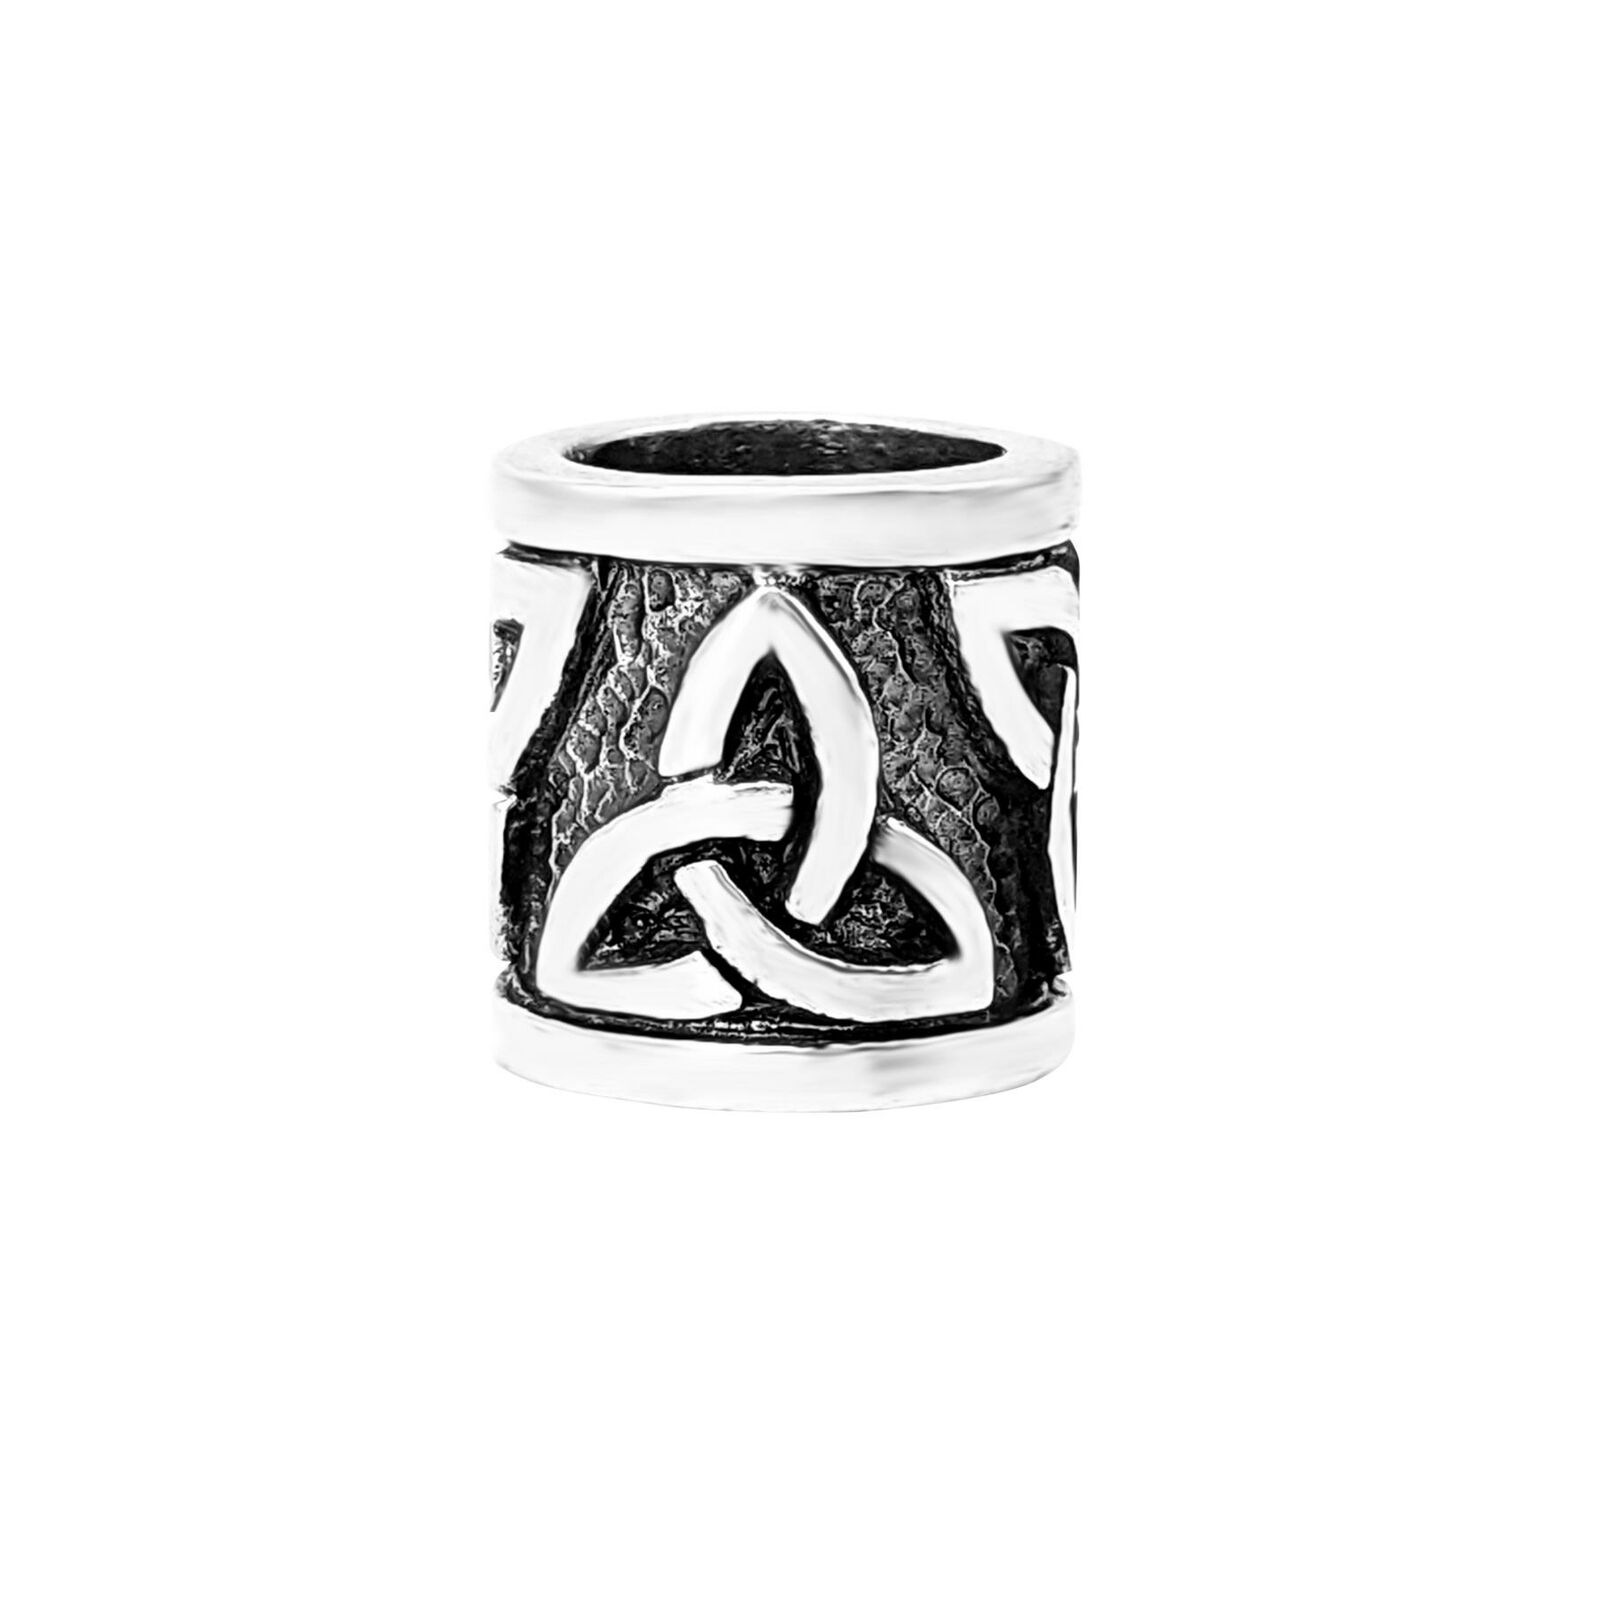 81stgeneration .925 Sterling 2021 Quality inspection new Silver Triquetra H Dreadlock Celtic